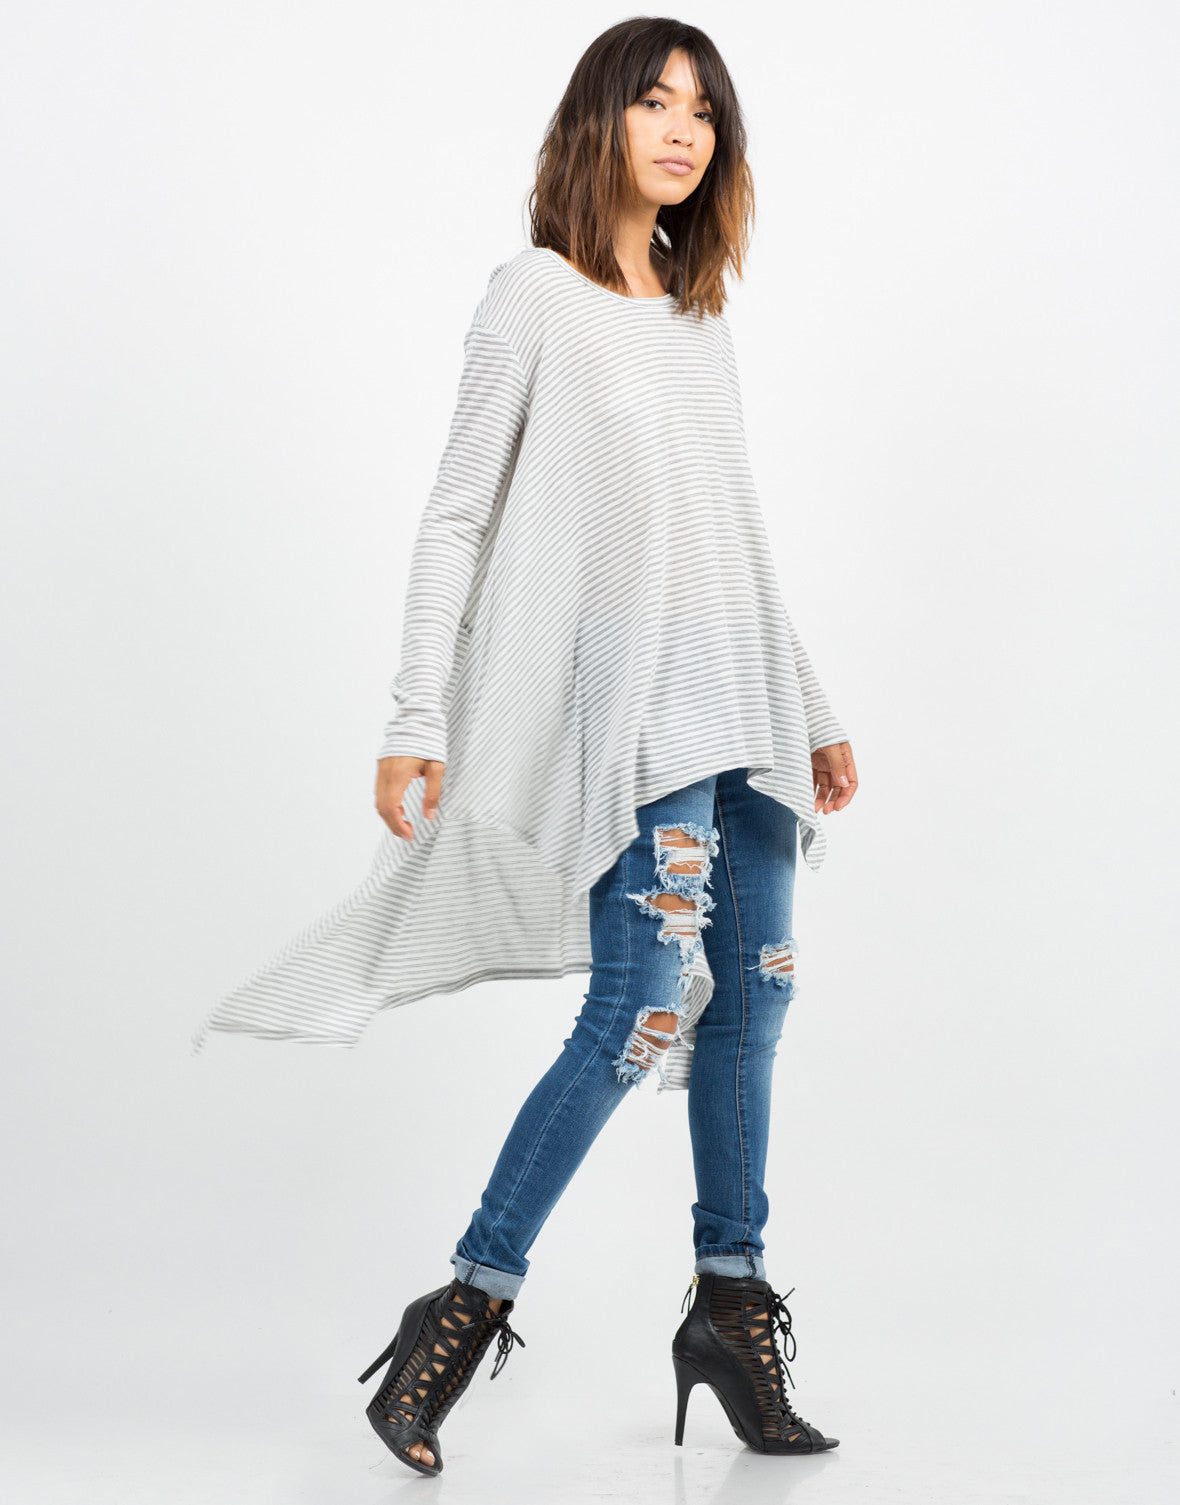 Oversized Asymmetrical Striped Top - Grey Top - Lightweight Top – 2020AVE